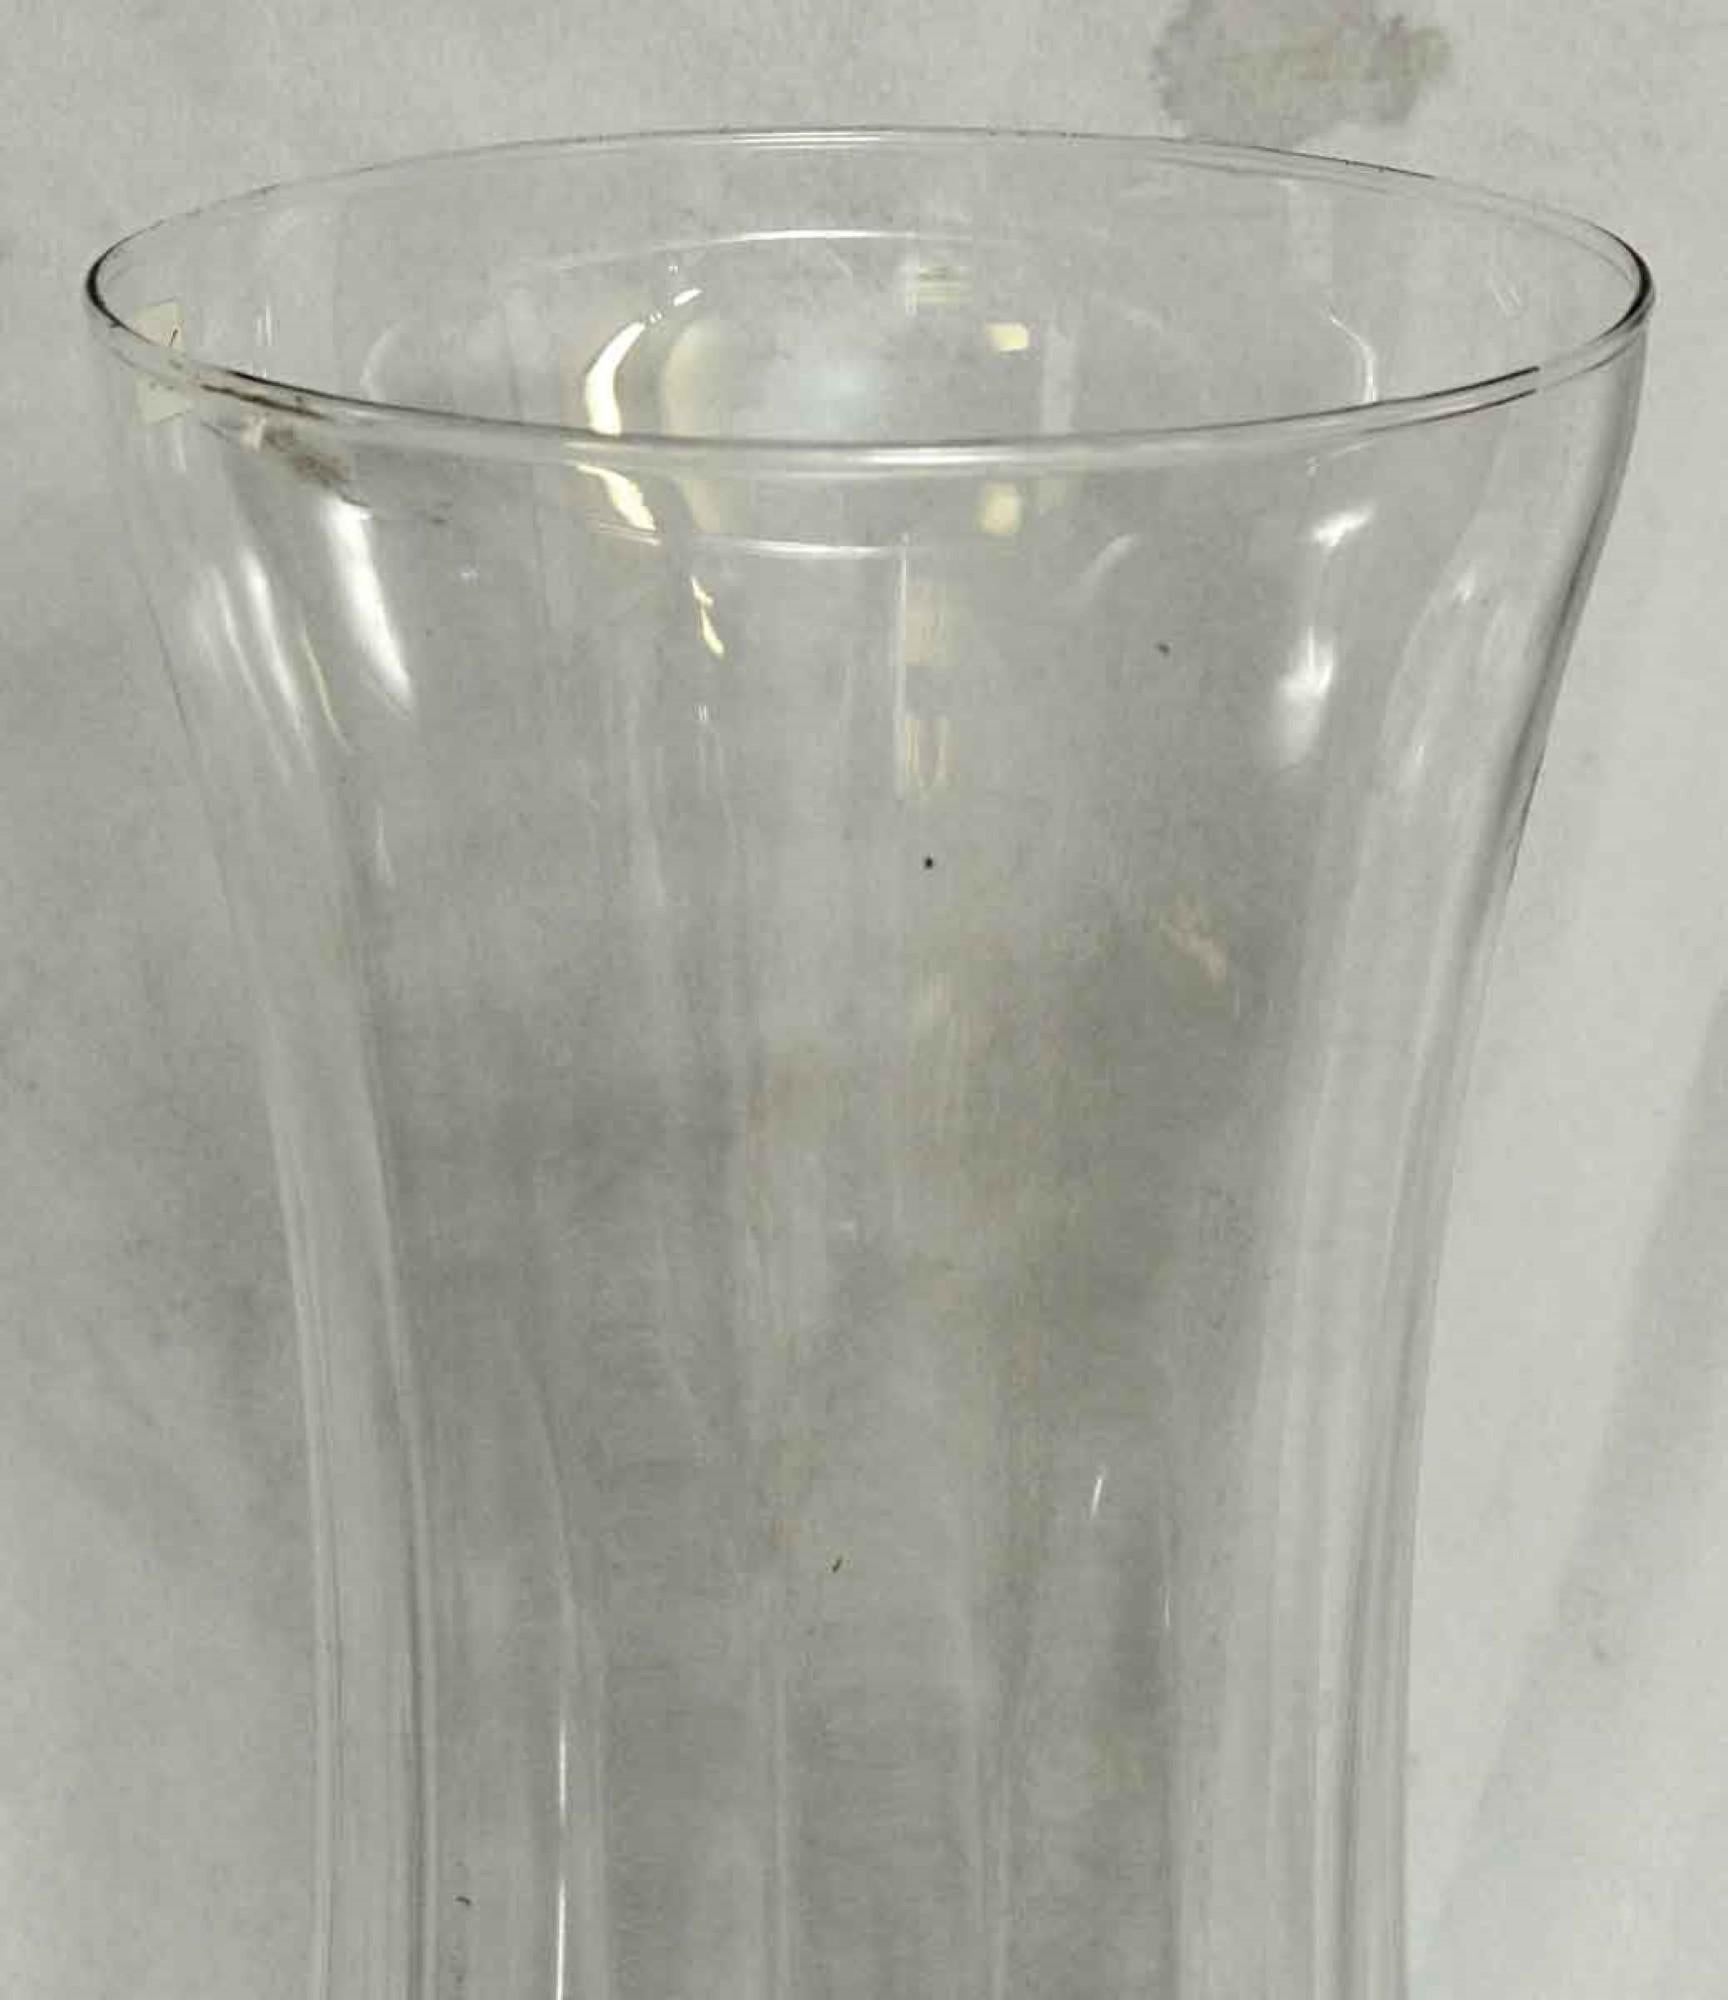 Vintage 1990s clear European round curved glass vase. Done in a Mid-Century Modern style. Small quantity available at time of posting. Please inquire. Small quantity available at time of posting. Please inquire. Priced each. This can be seen at our